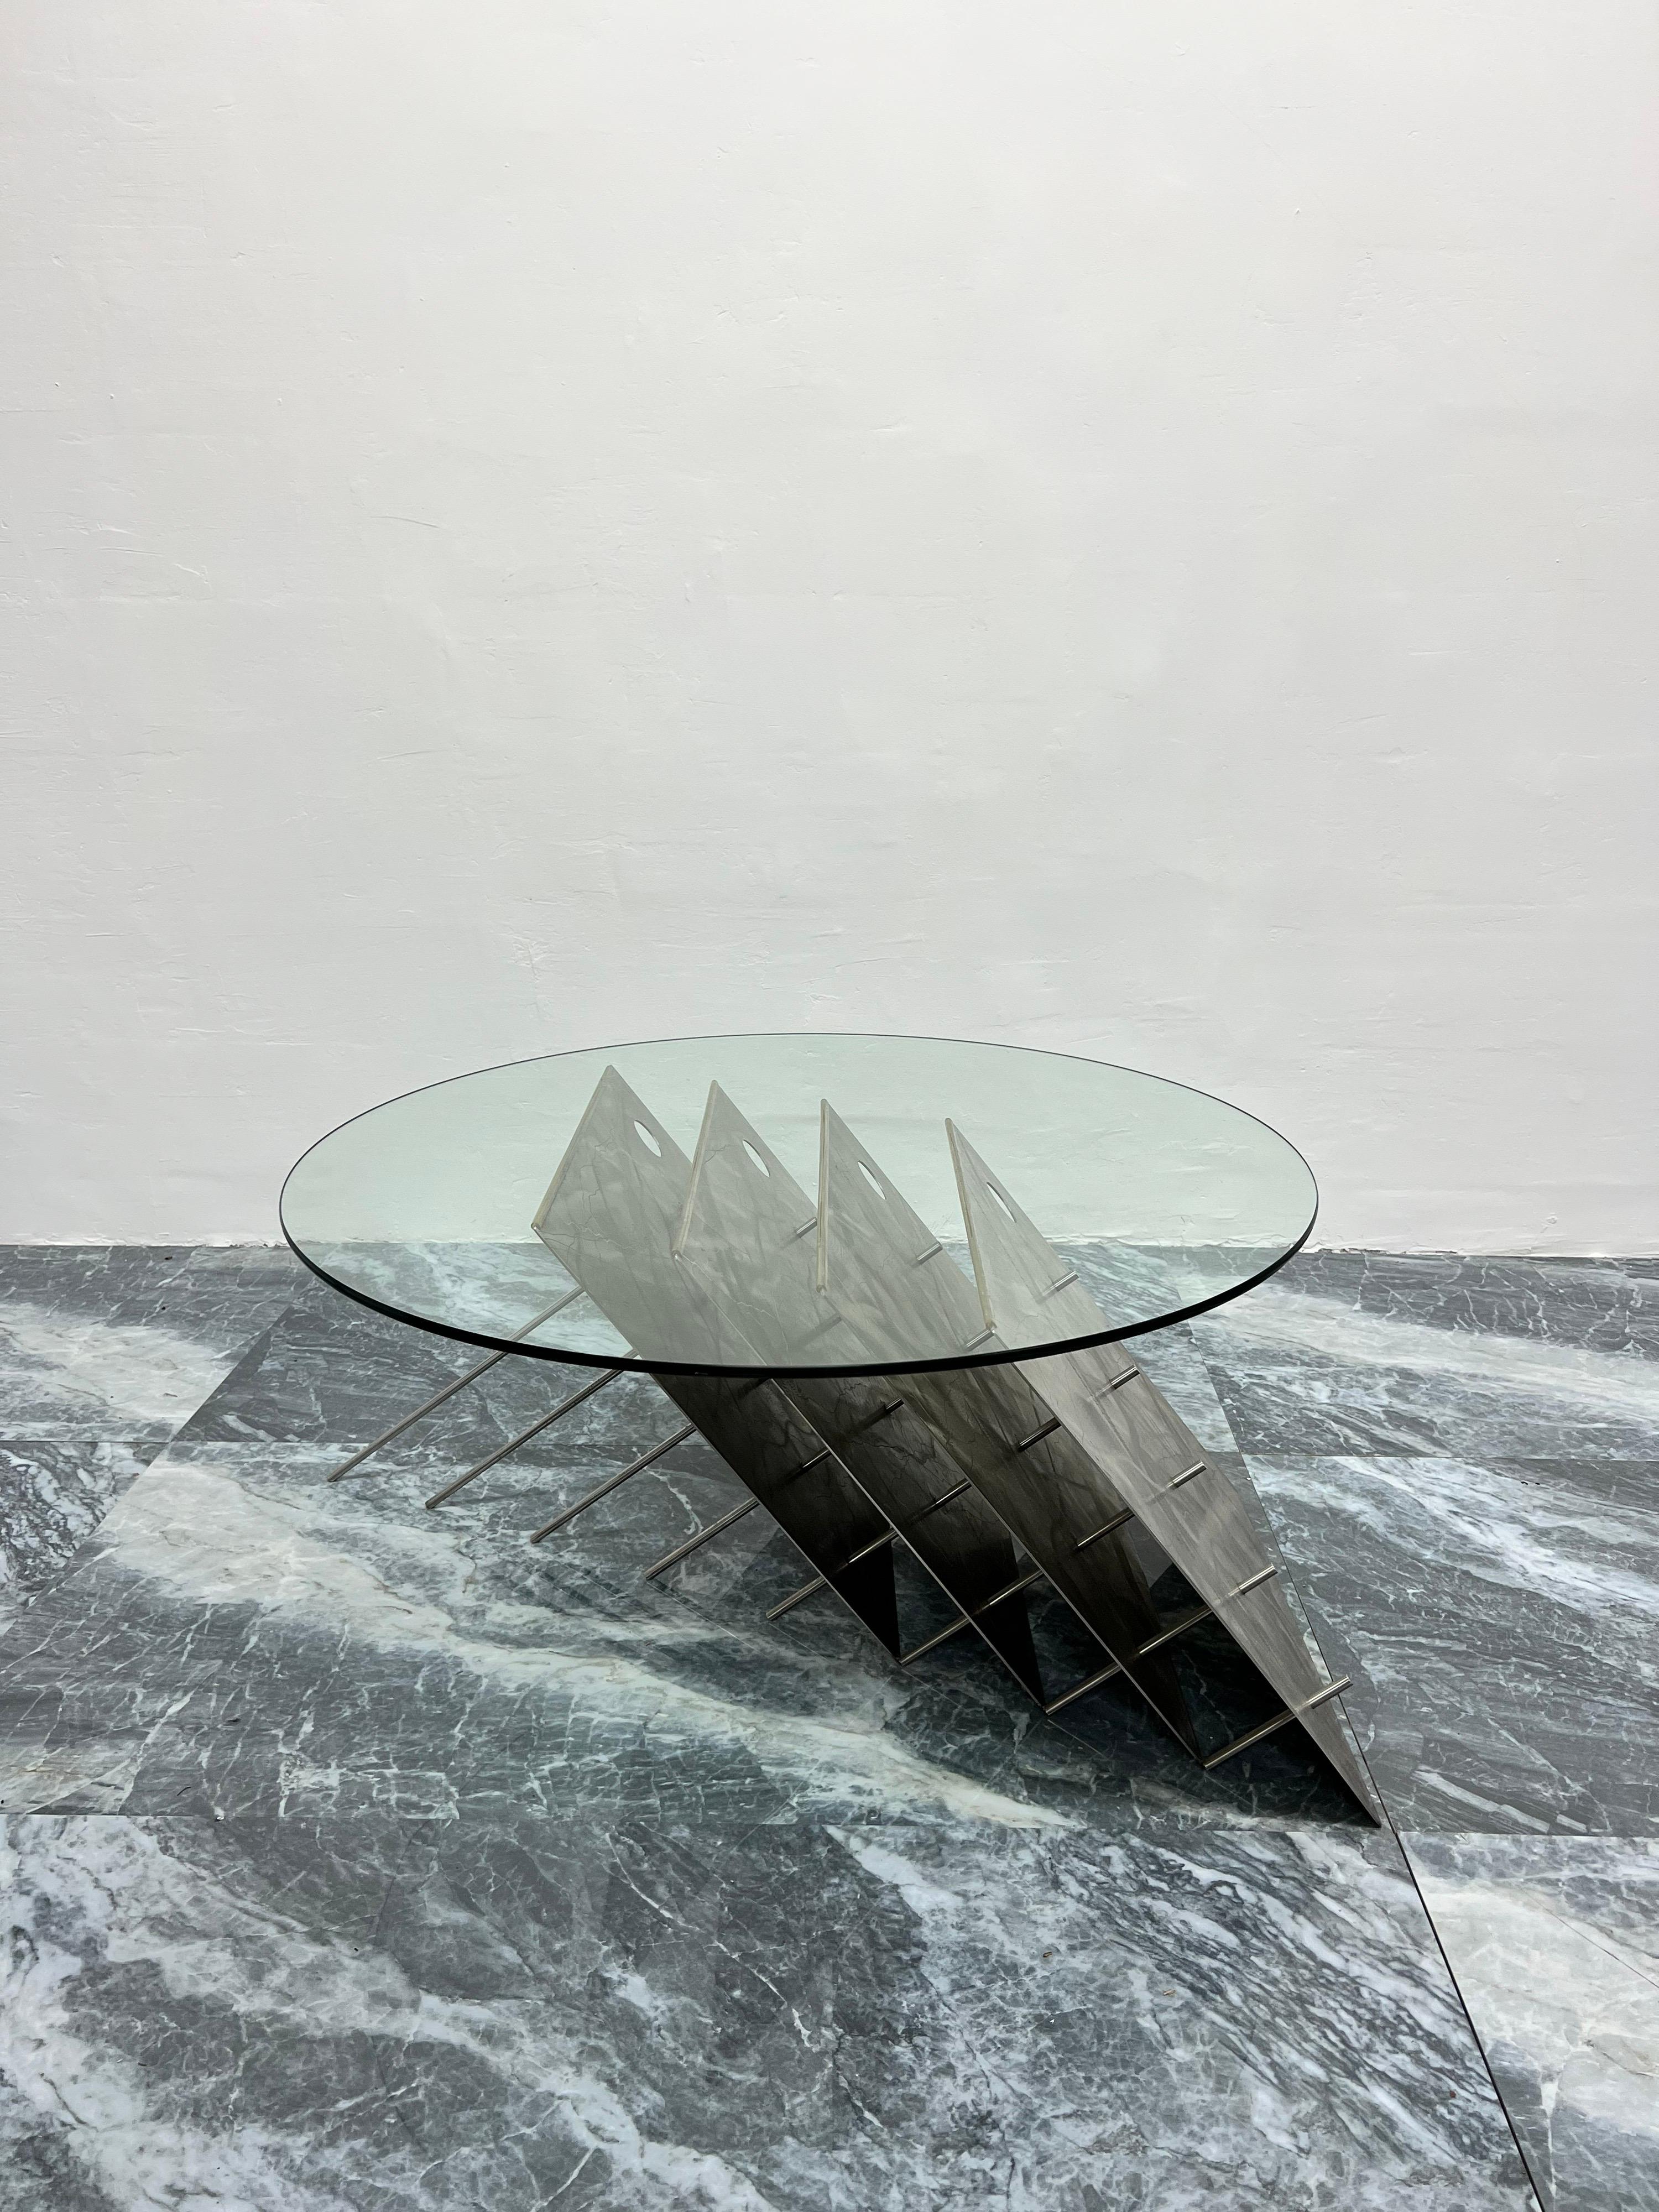 Contemporary brushed steel with metal rod coffee table and circular glass top. Custom made in the 1990s by unknown artist.

Glass Dimensions:
D 36